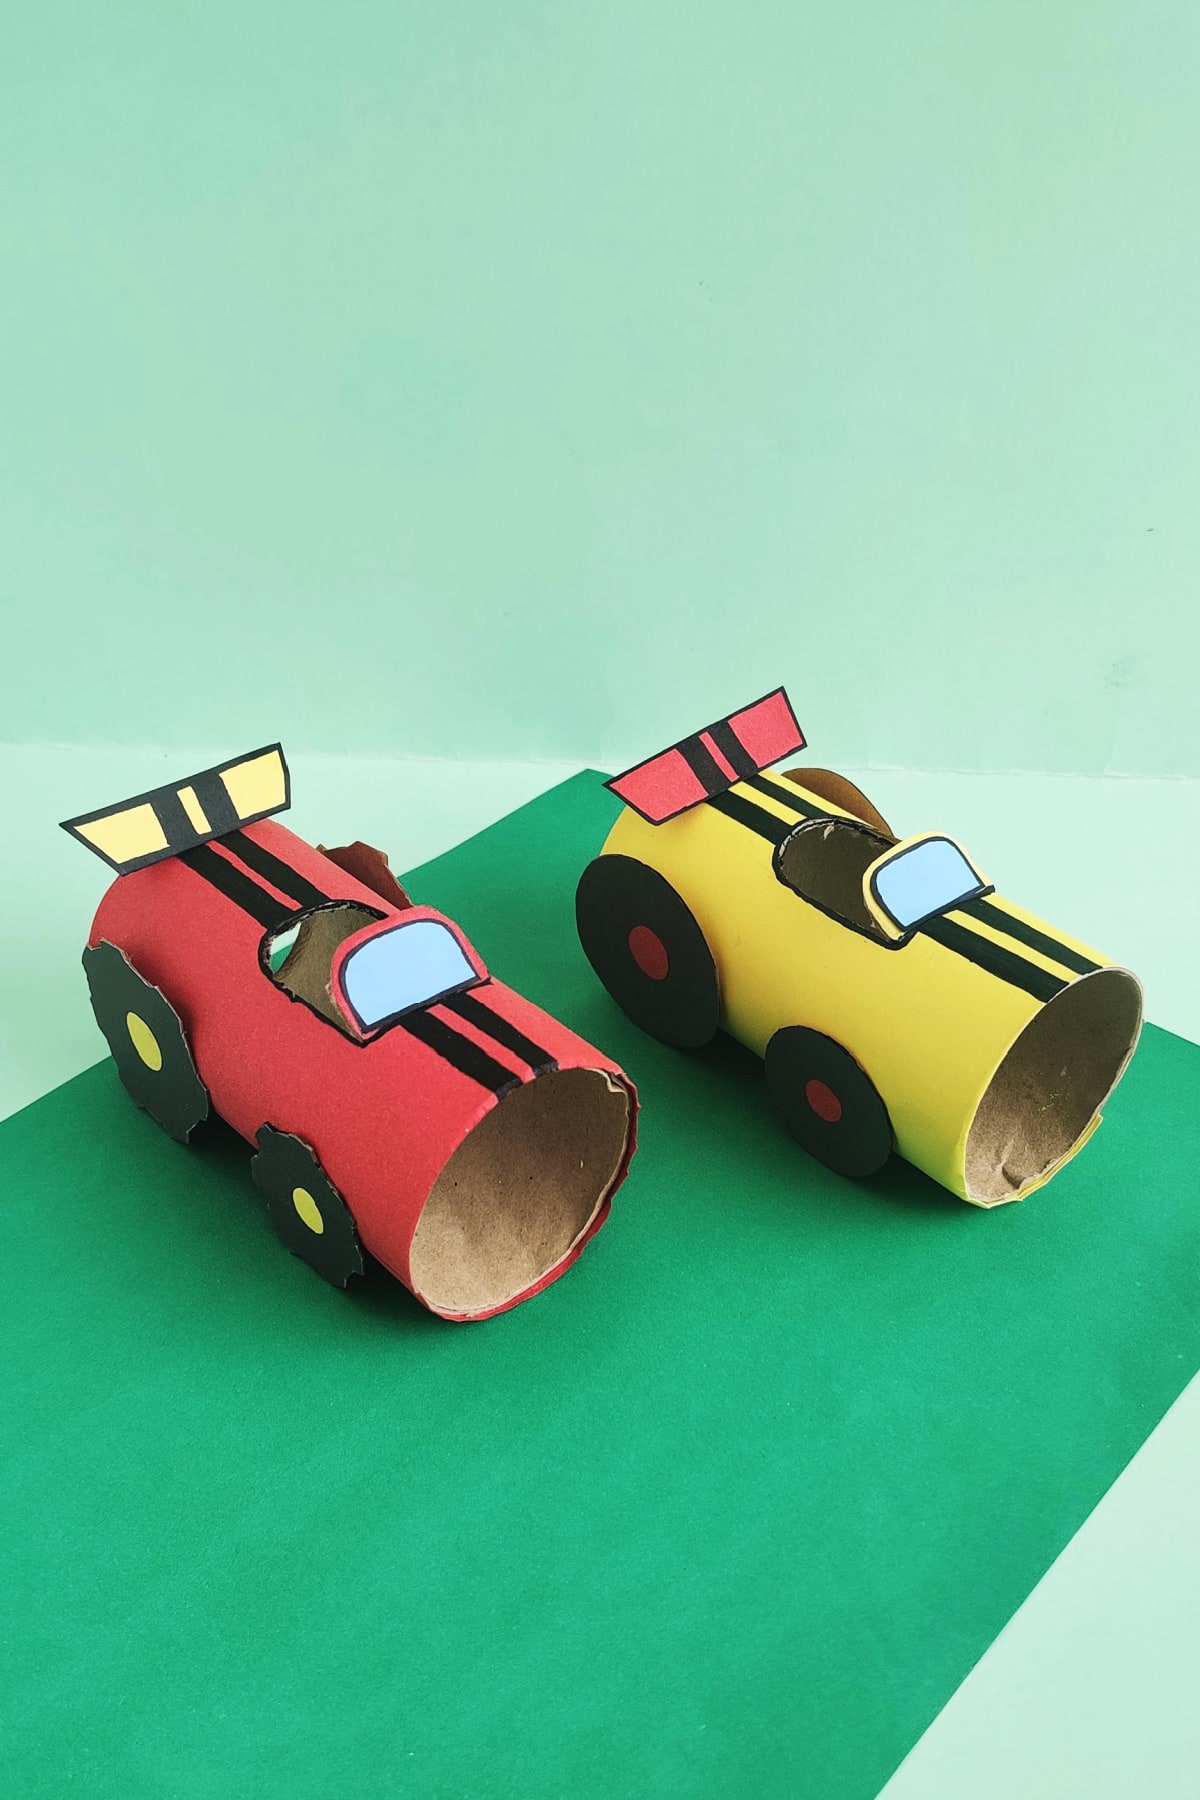 DIY race cars made from basic home-found tools like toilet paper rolls, scissors, markers, and glue